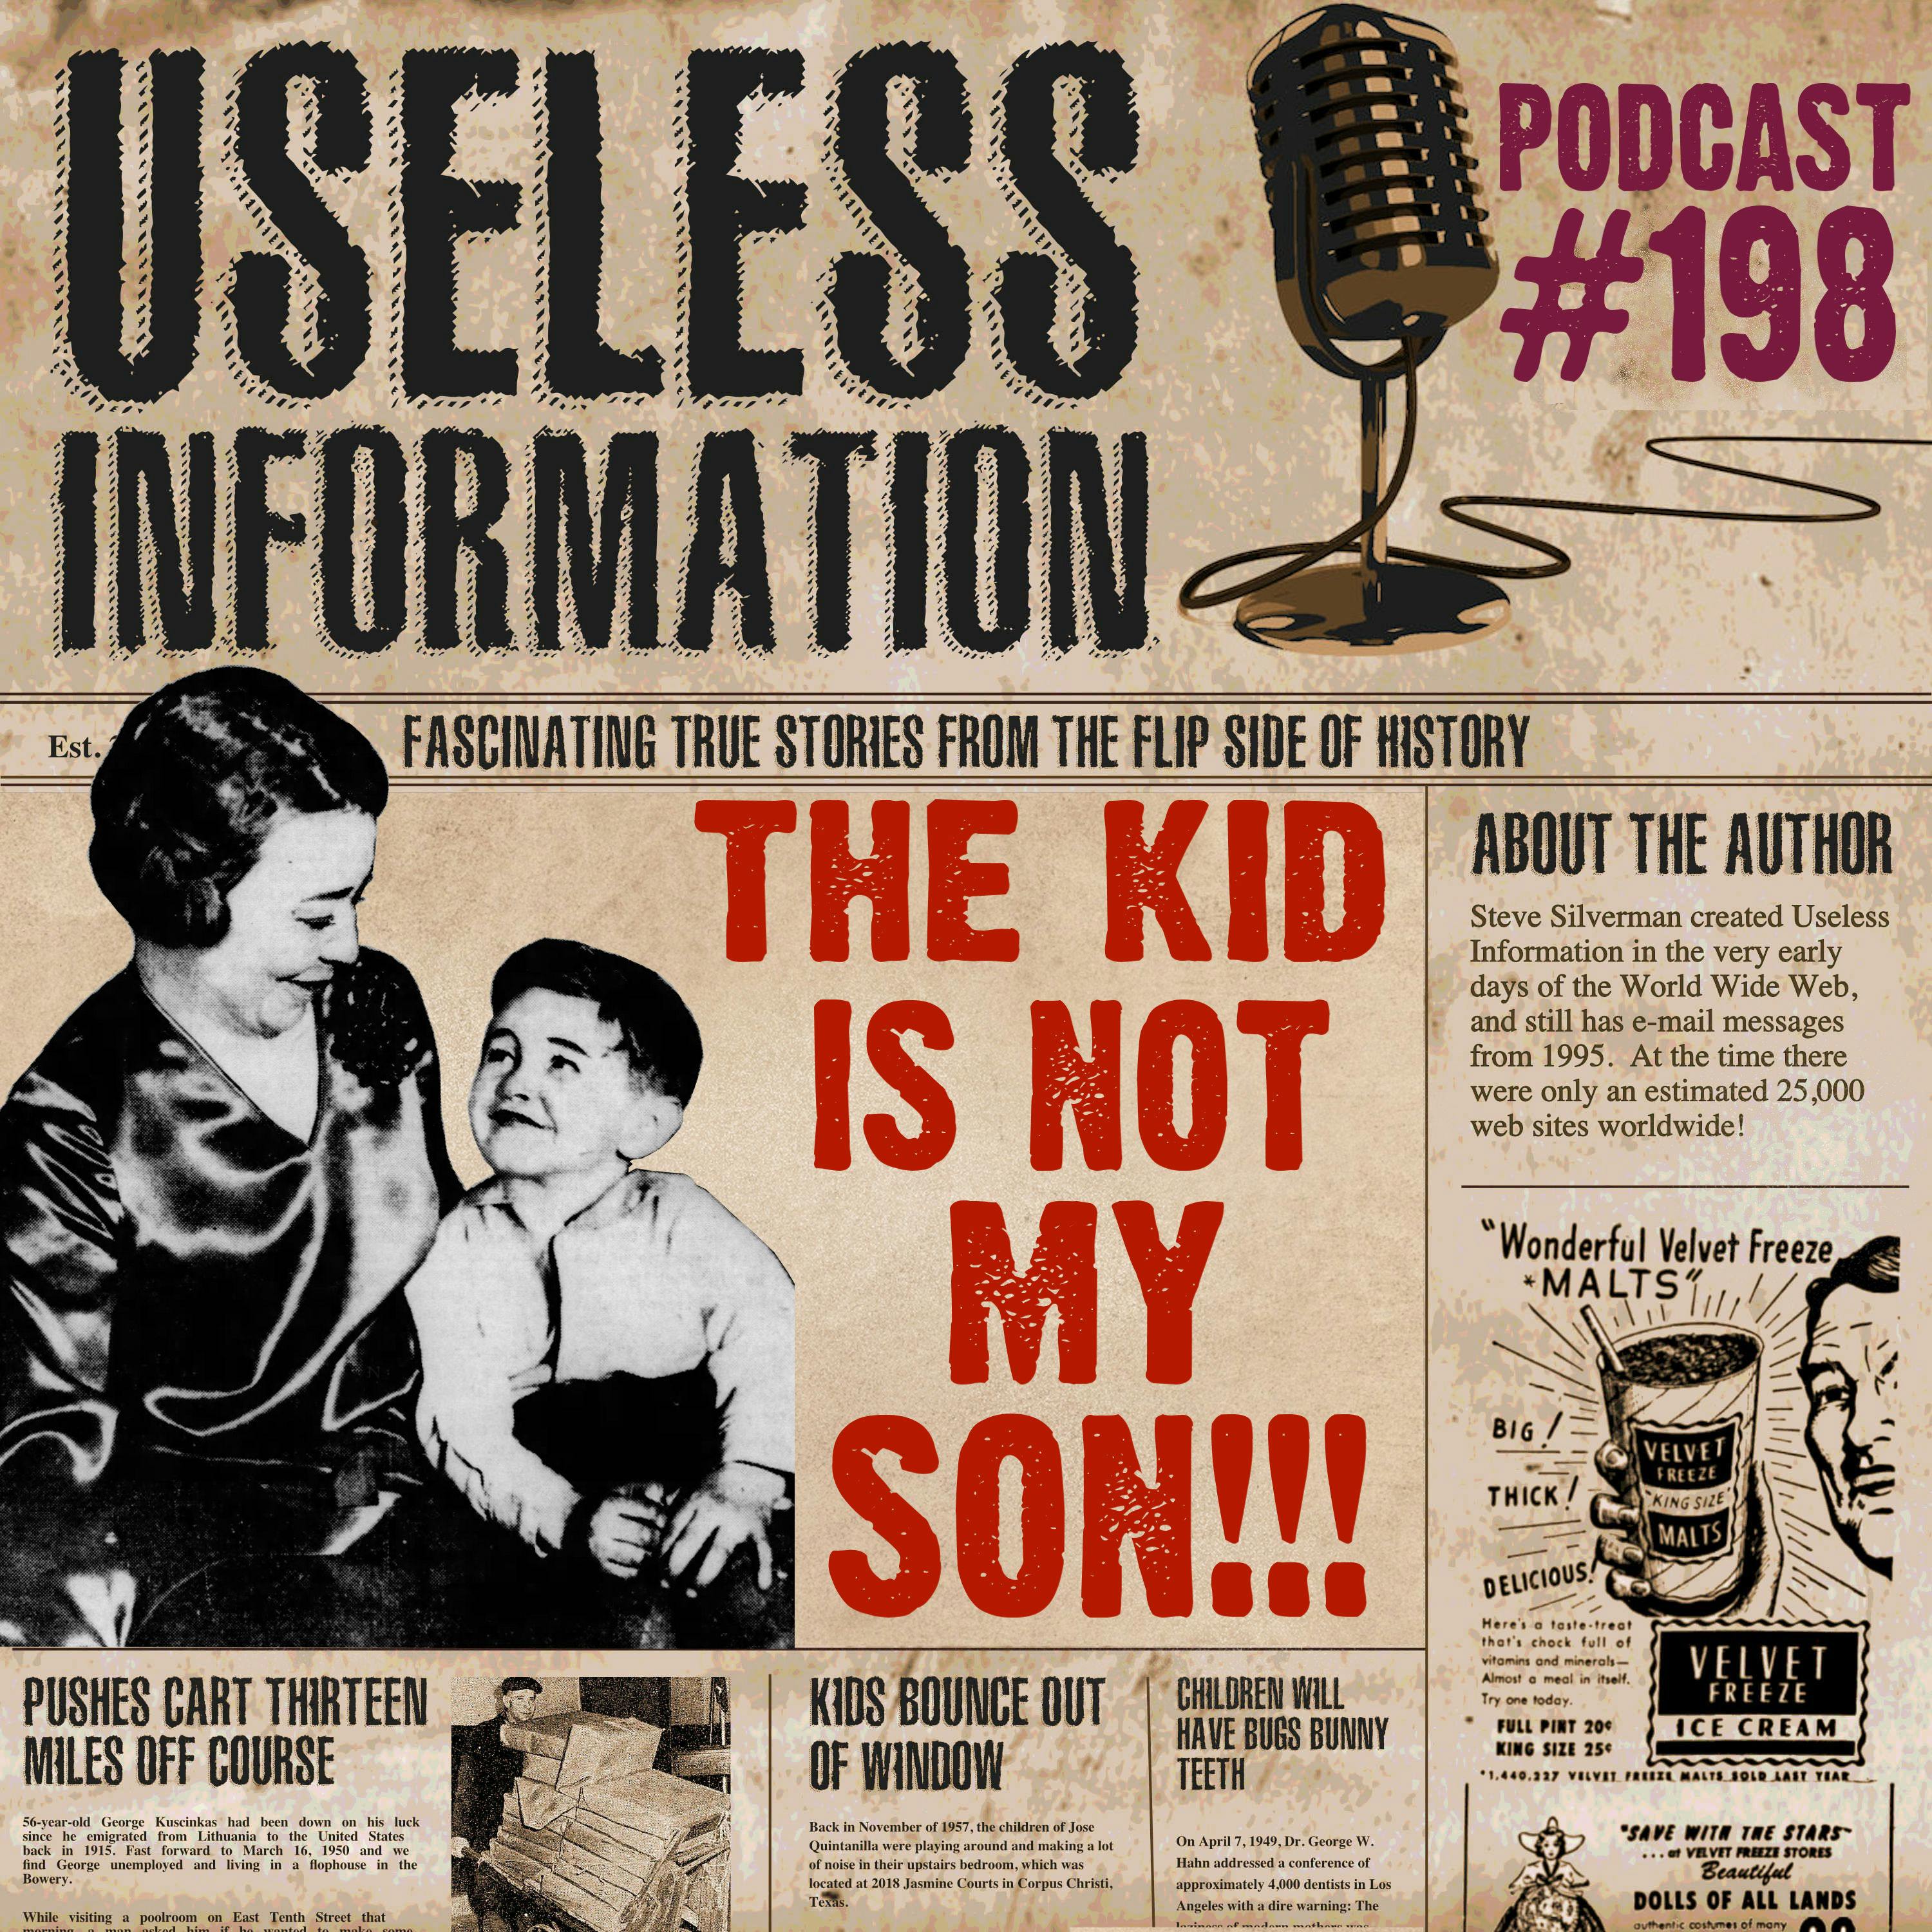 The Kid Is Not My Son - UI #198